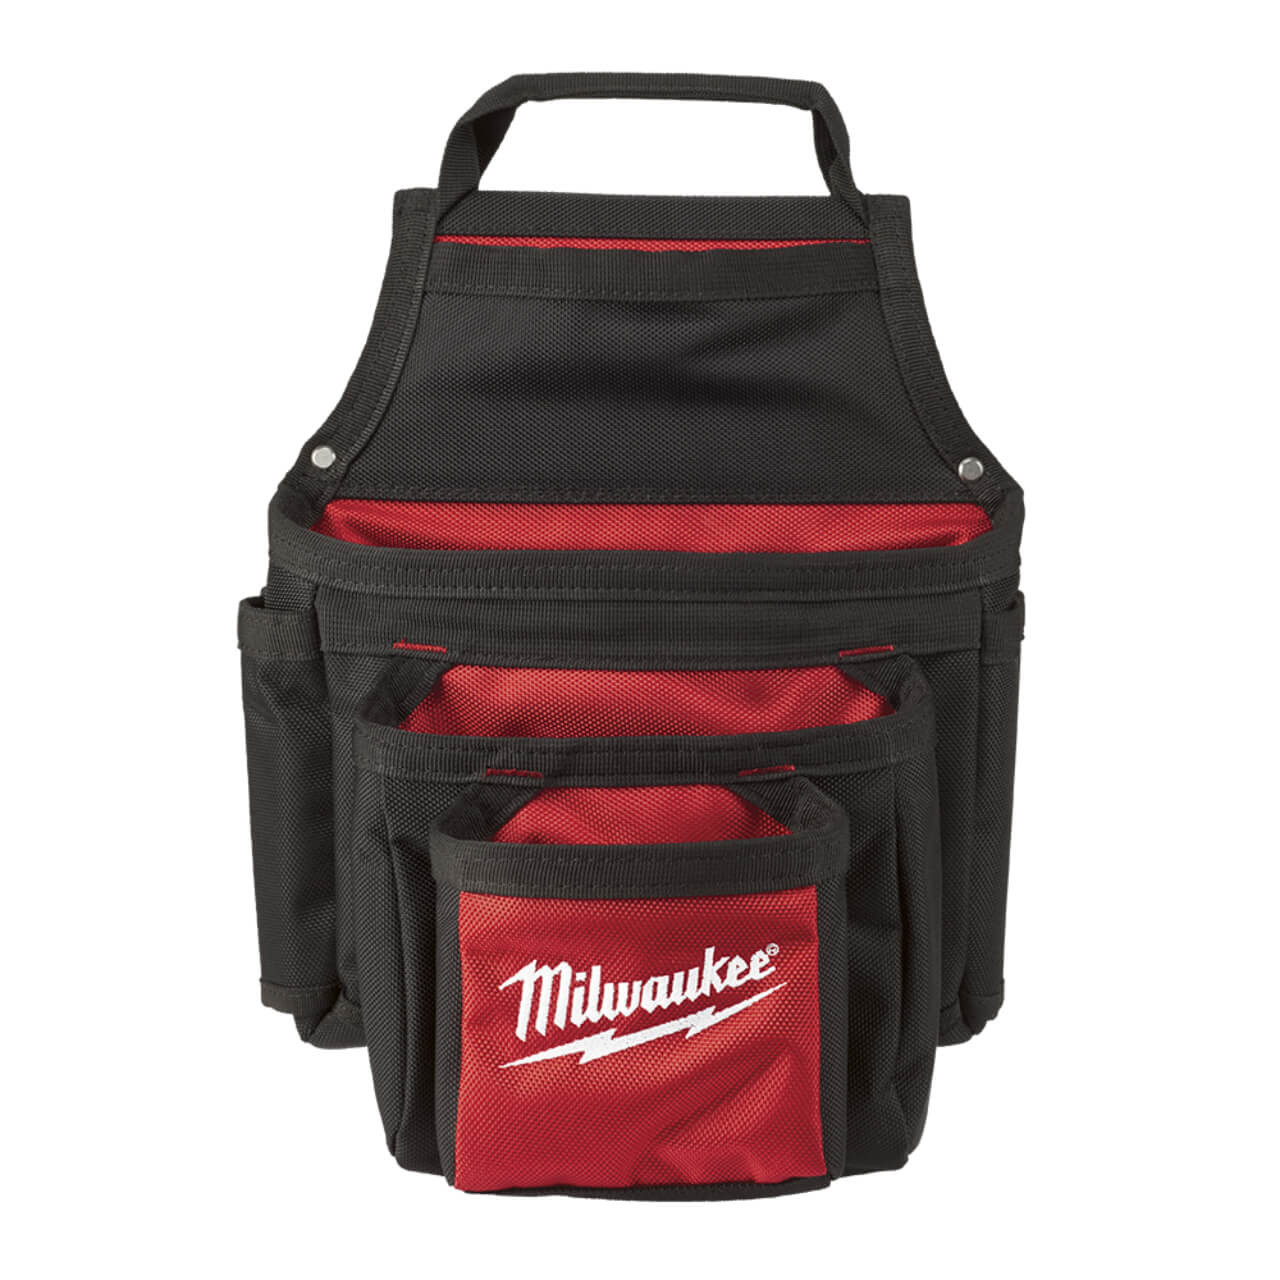 Milwaukee 13 Pocket 3 Tier Material Pouch